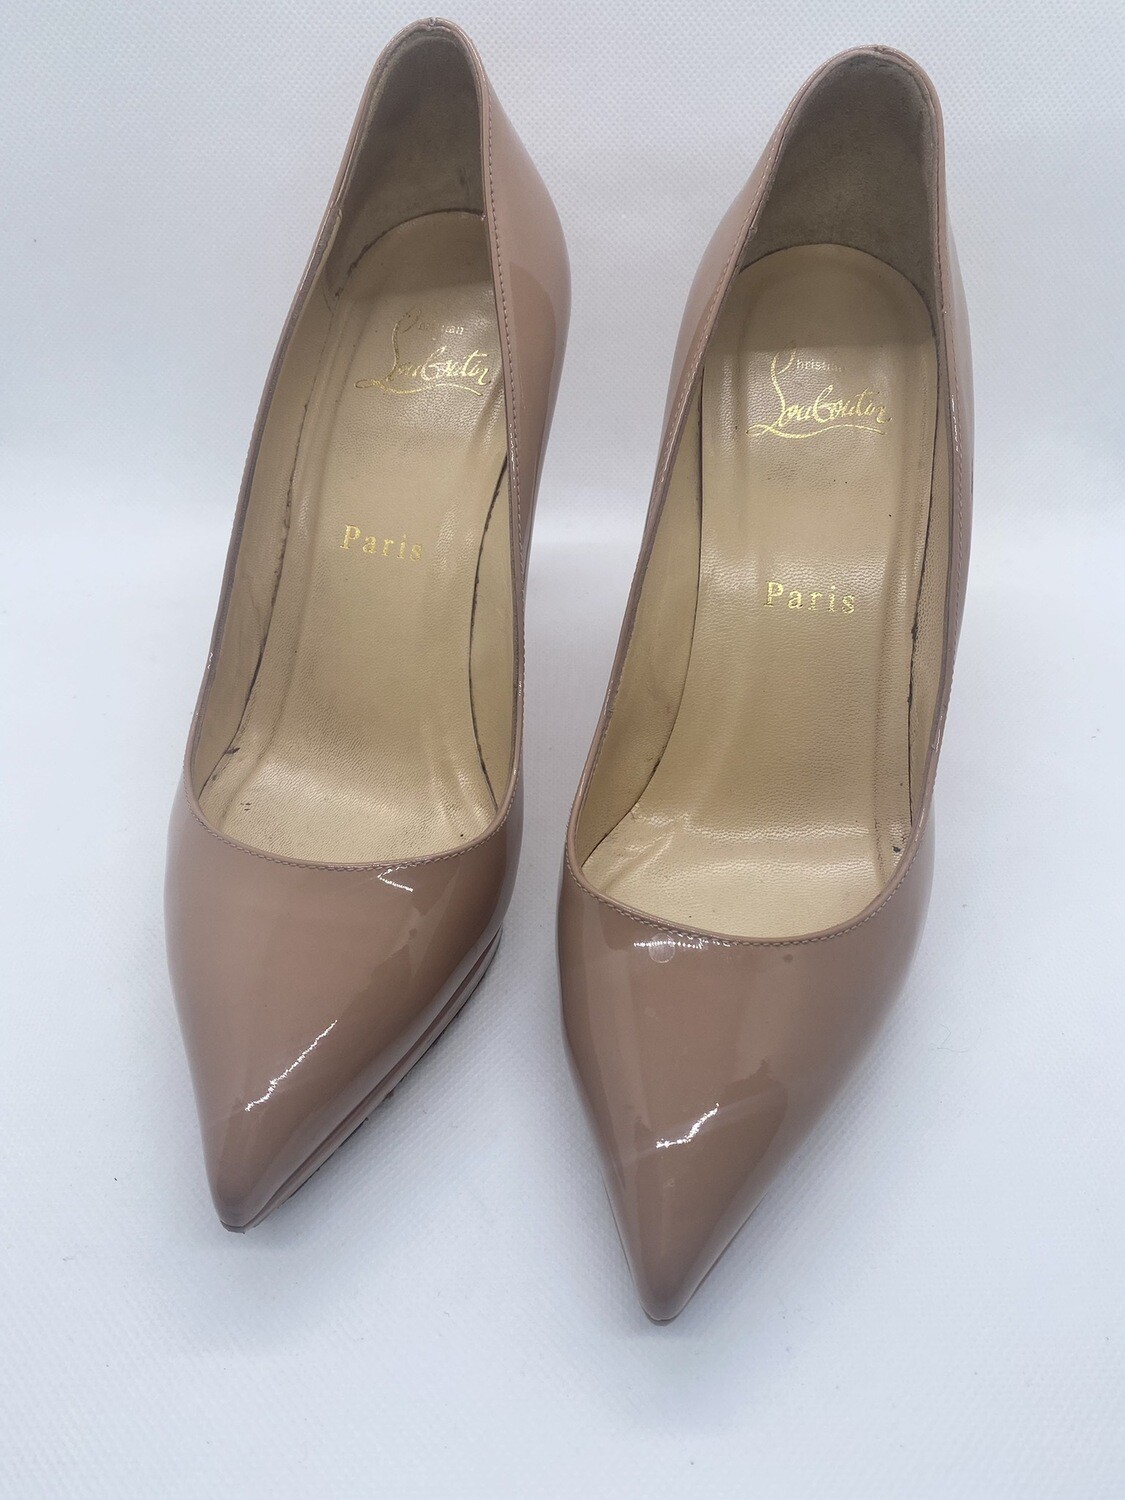 Christian Louboutin Pigalle Plato Nude 100